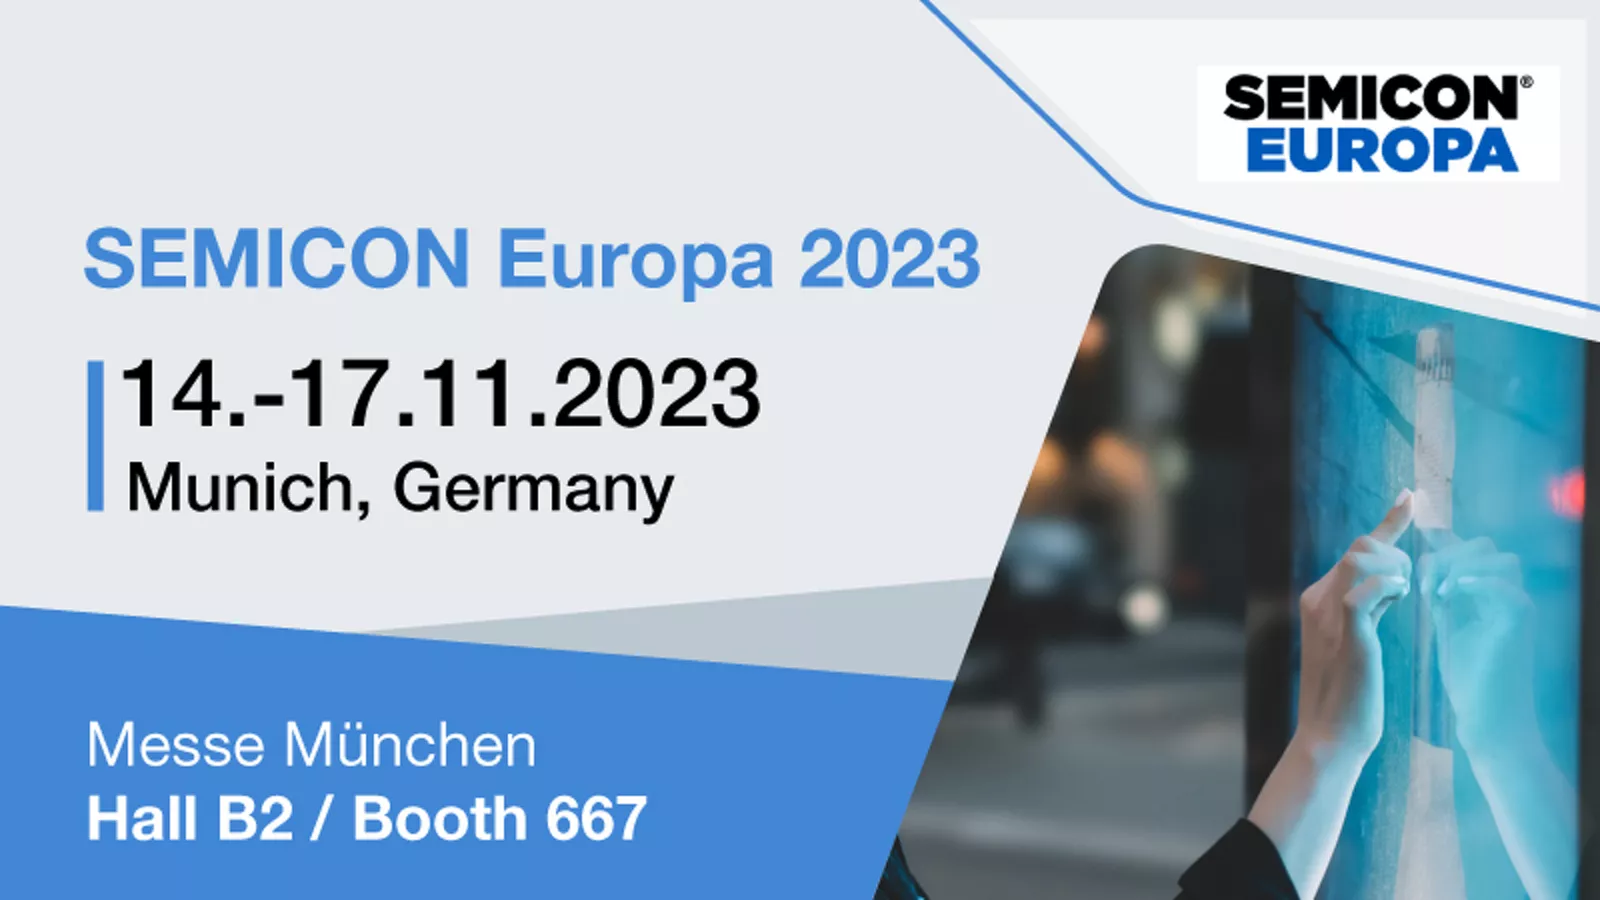 Plansee at SEMICON Europa 2023